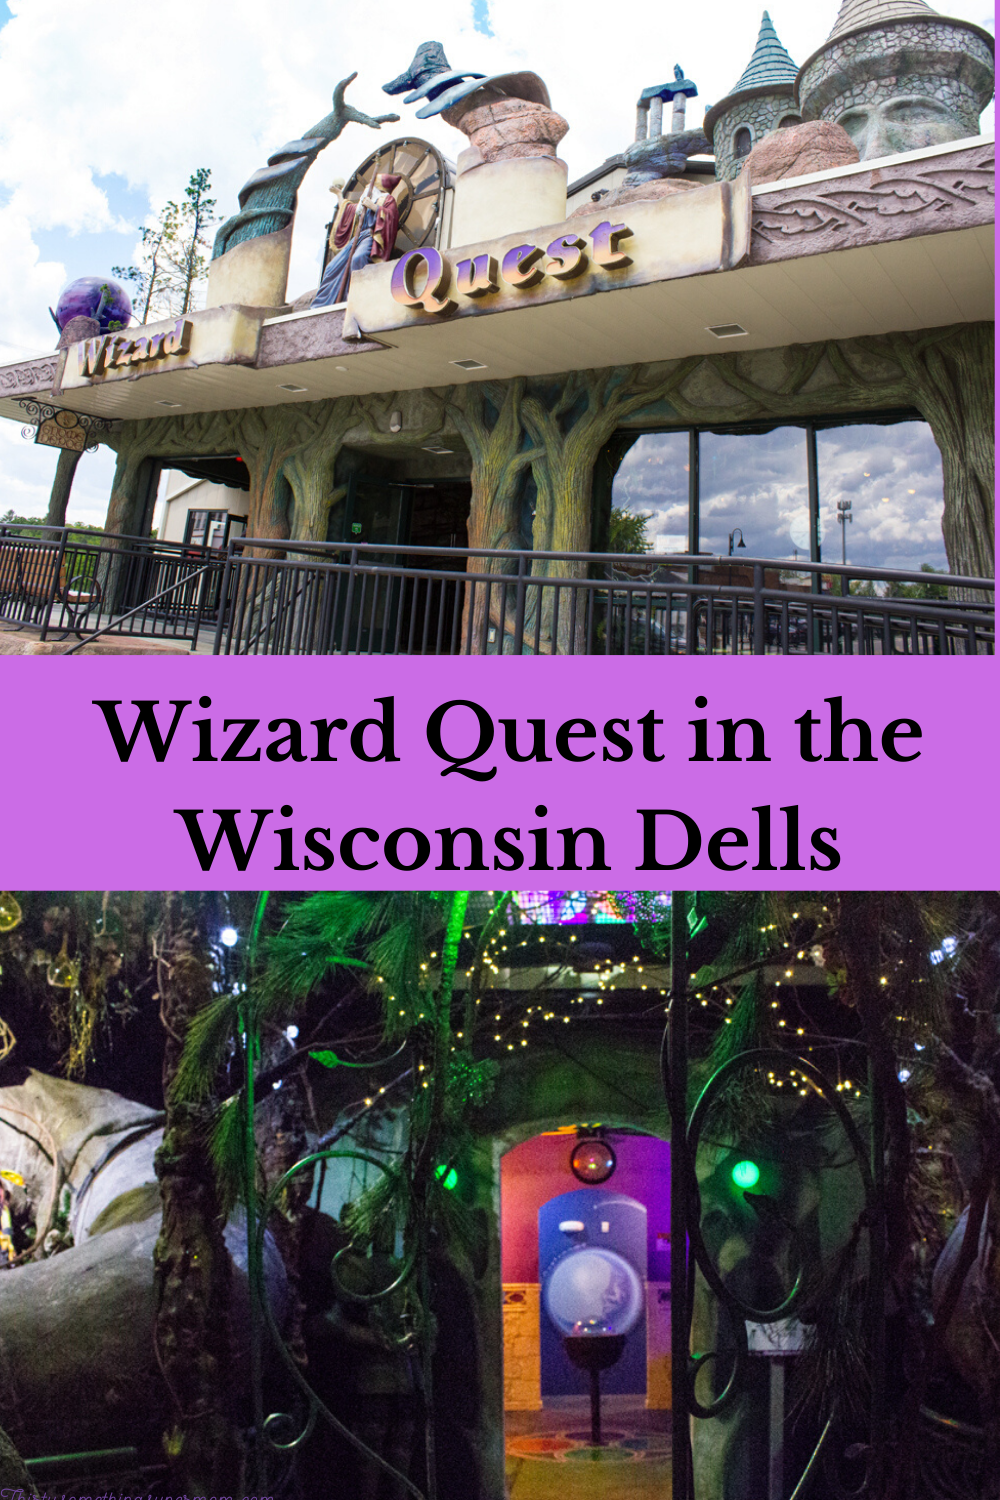 Things to do in Wisconsin Dells: Wizard Quest